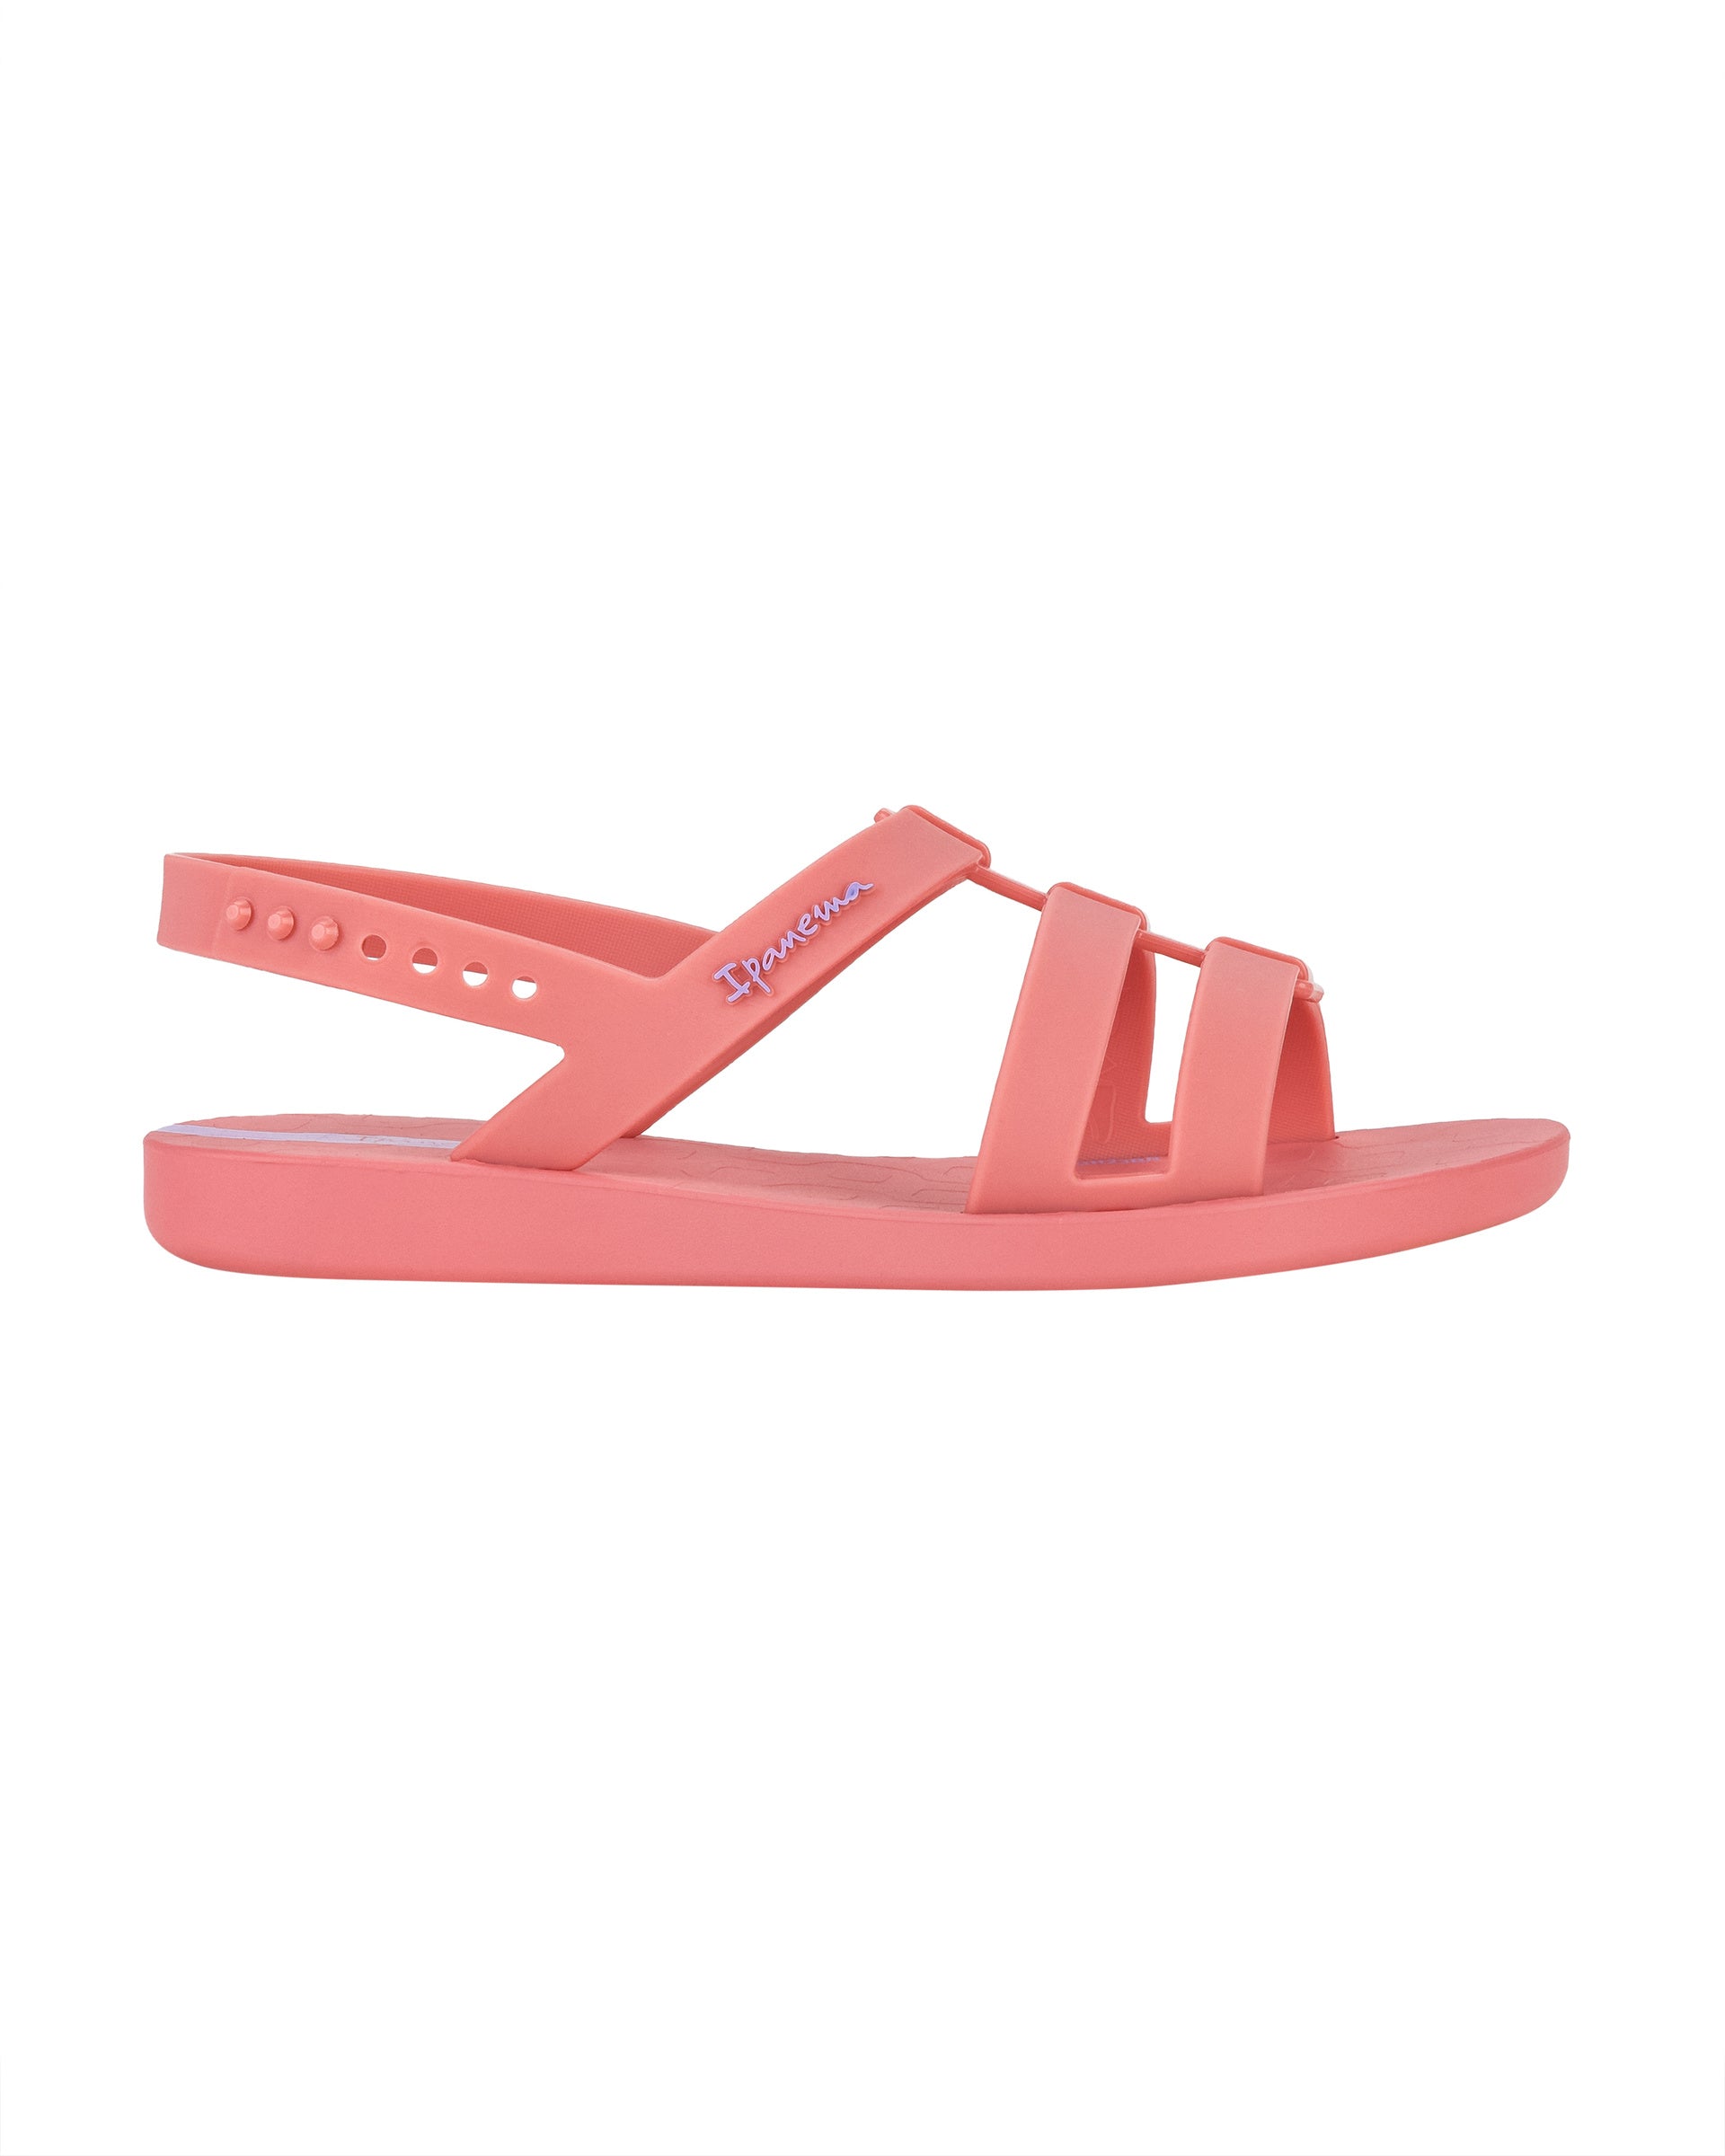 Outer side view of a pink Ipanema Class Go women's sandal.